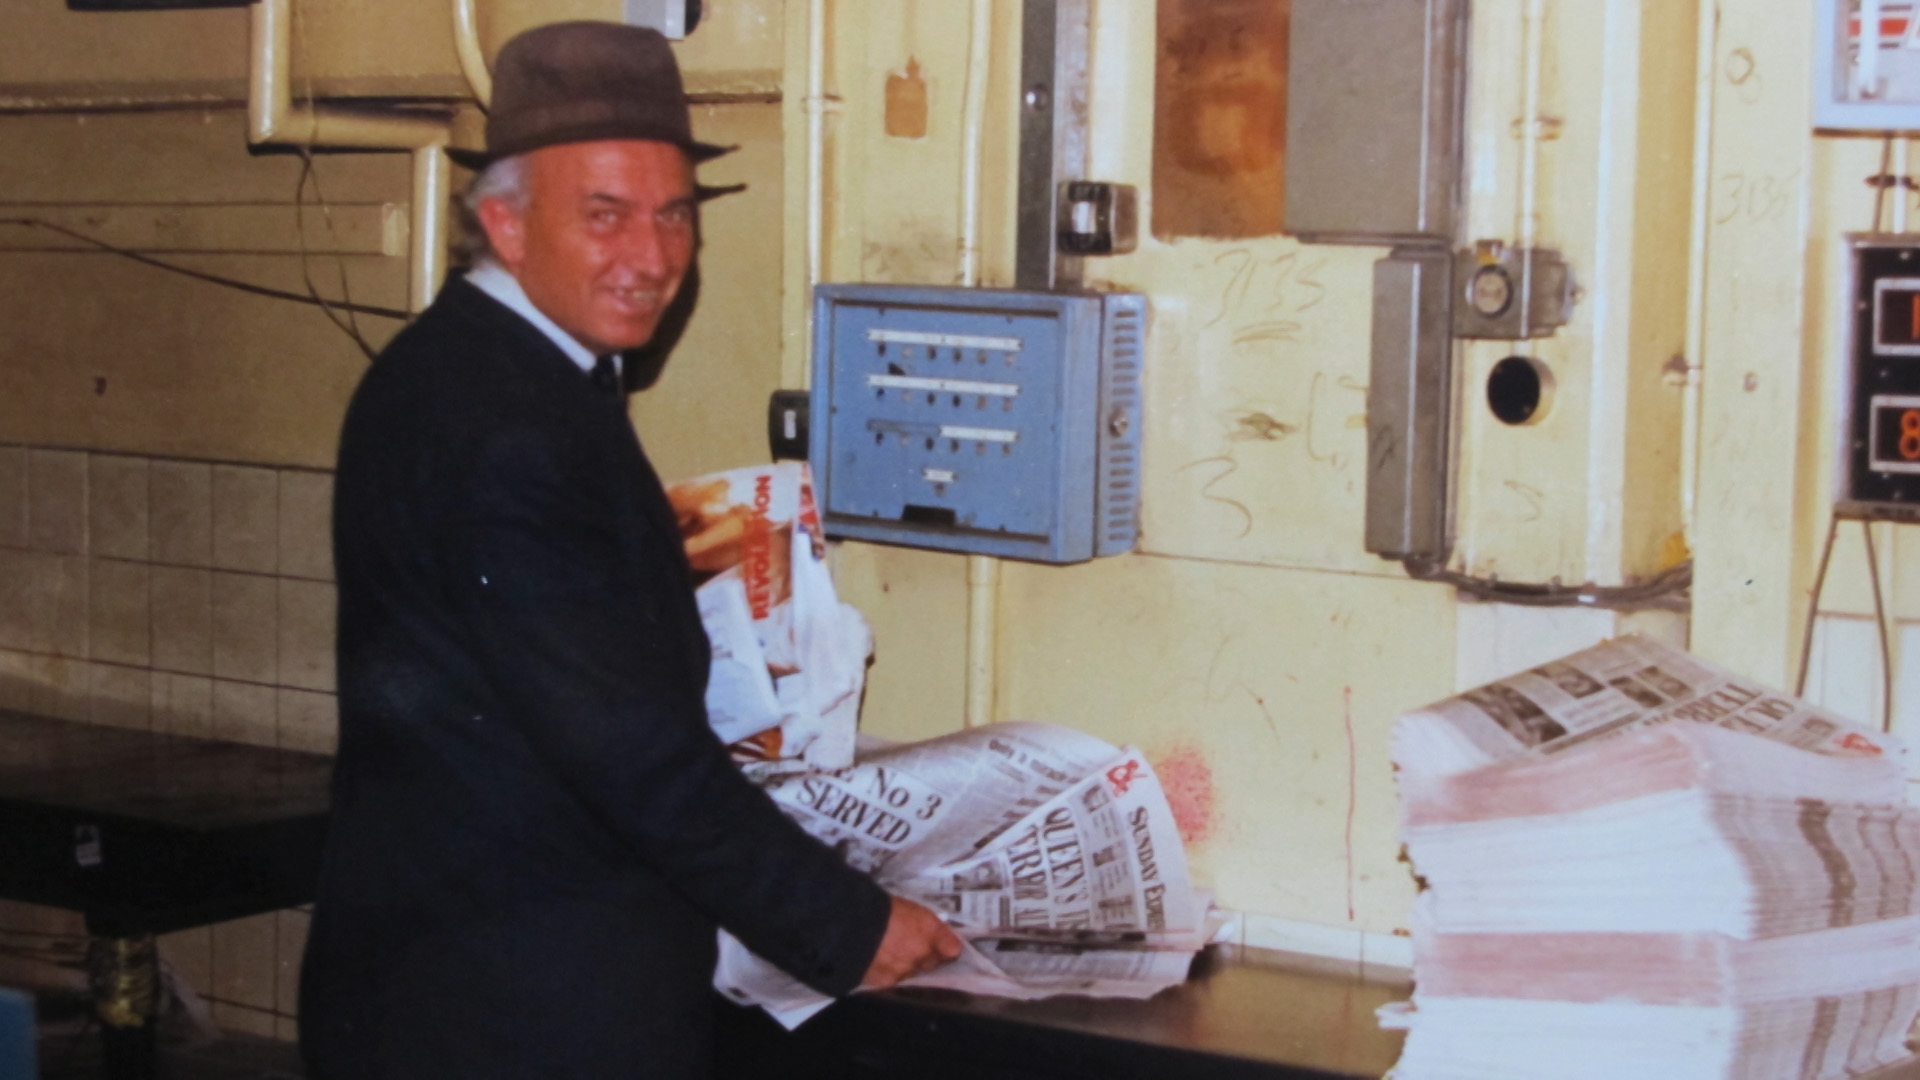 newspaper employee with newspaper. Old photograph.